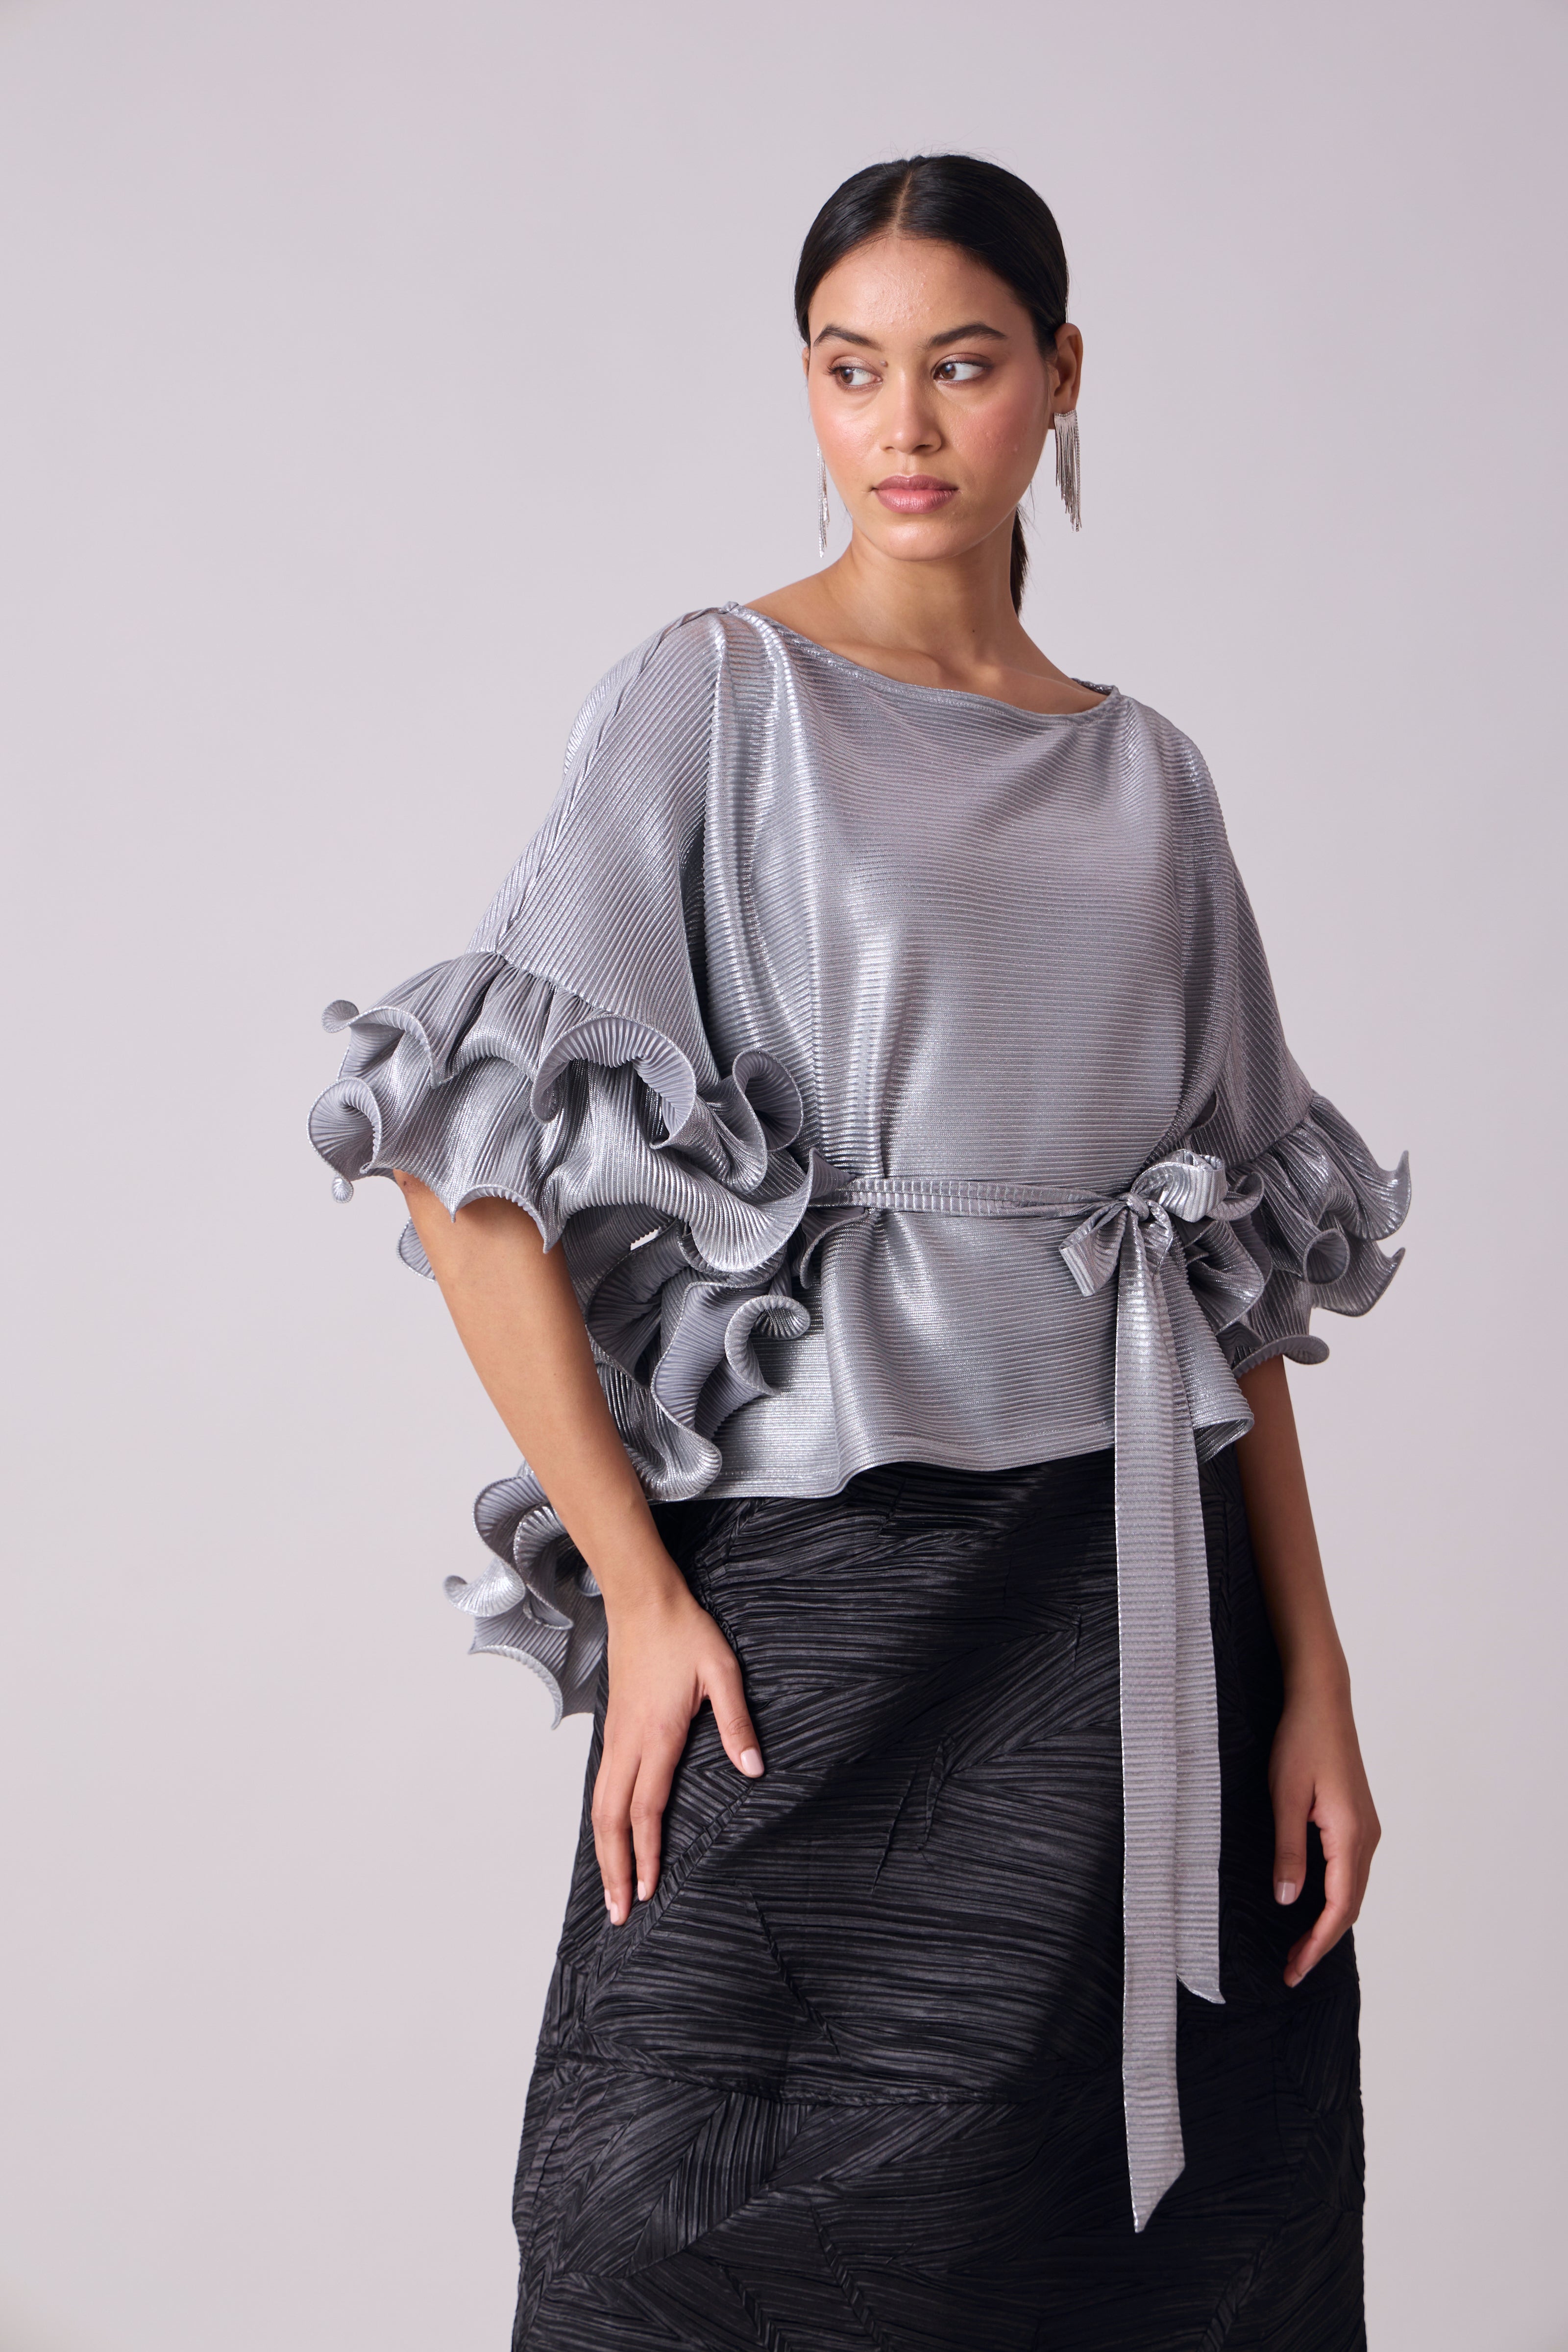 Ray Top - Micropleated Silver